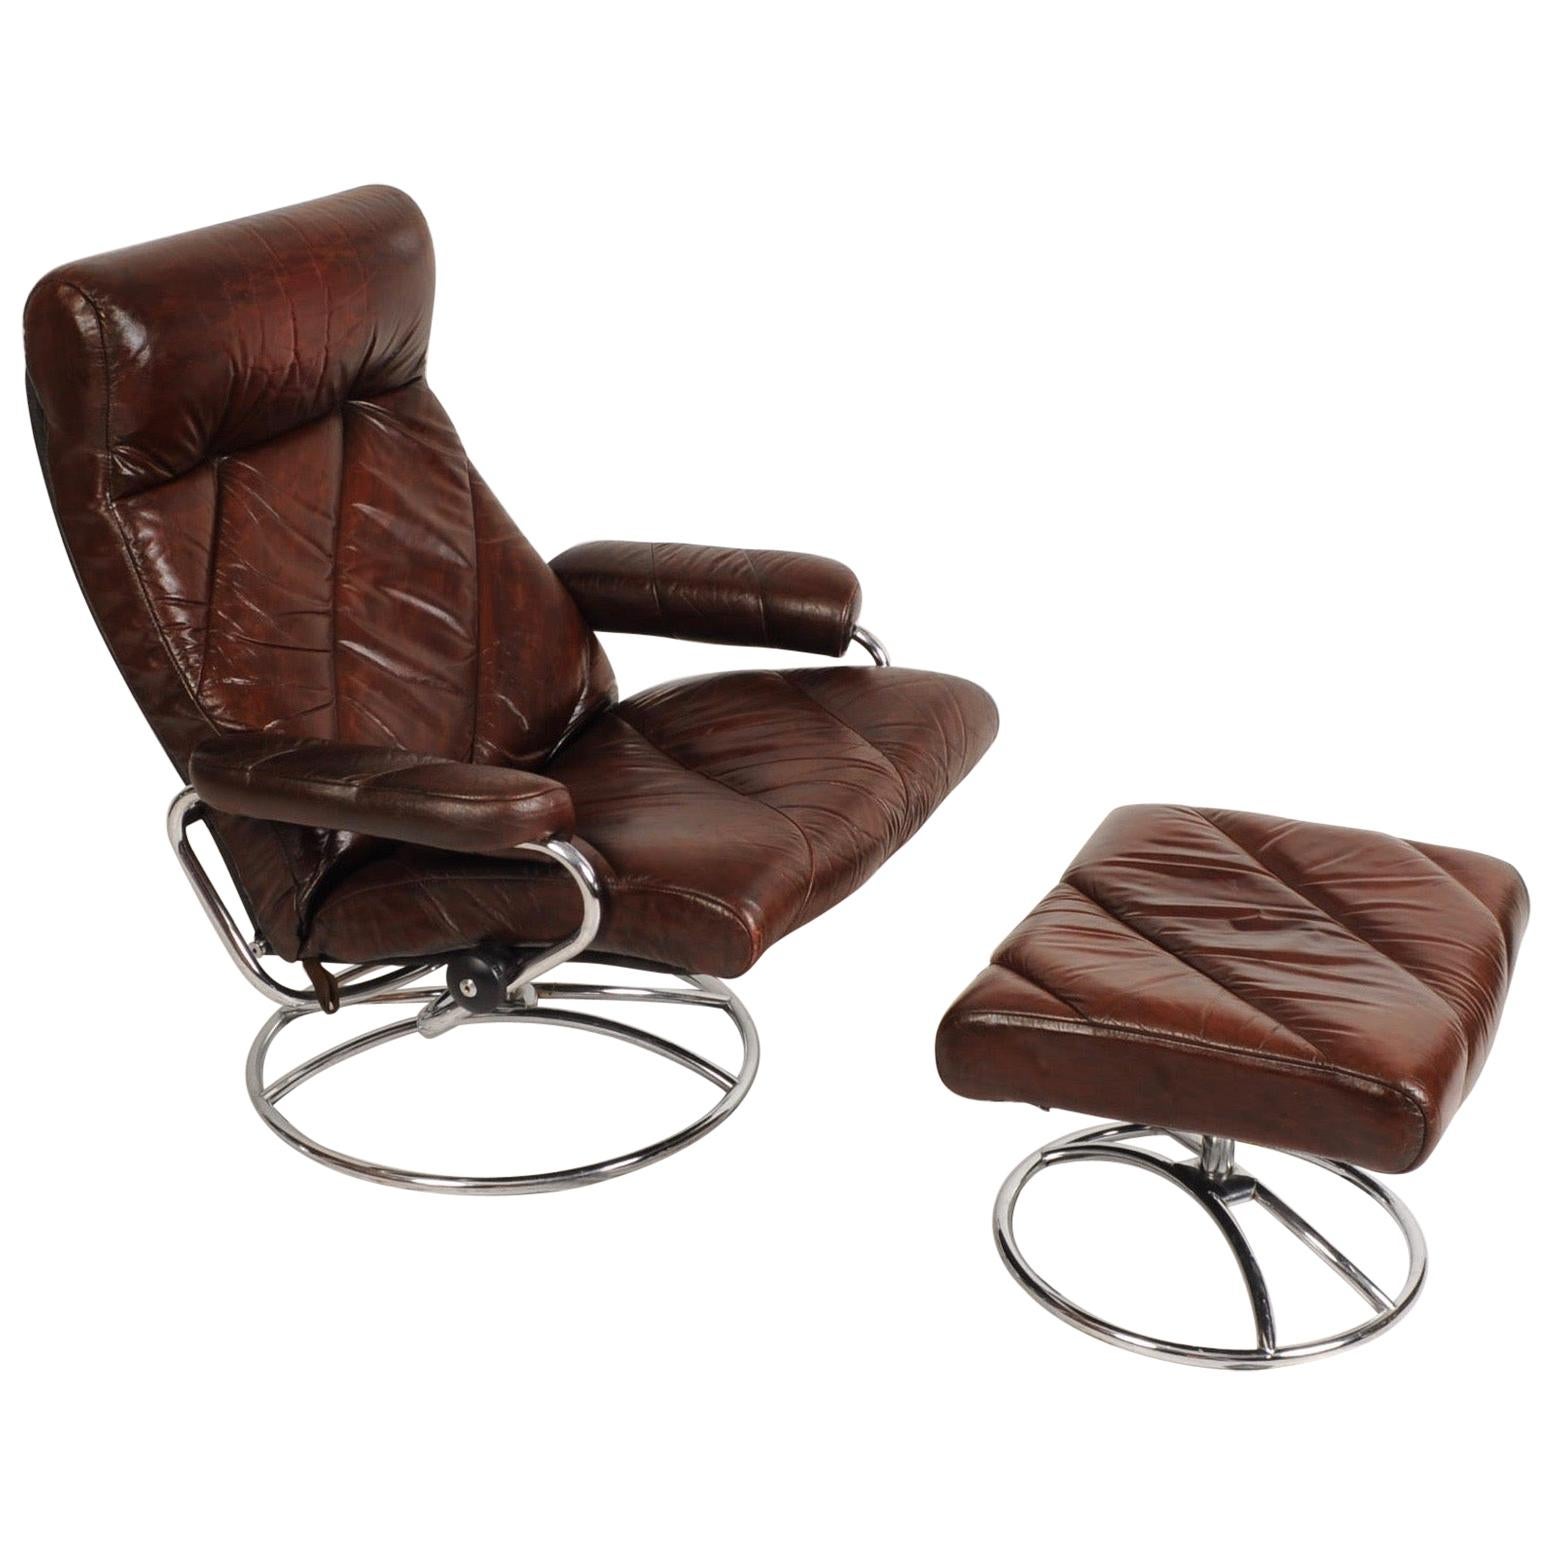 Midcentury Ekornes Stressless Brown Leather Lounge Chair and Ottoman For Sale